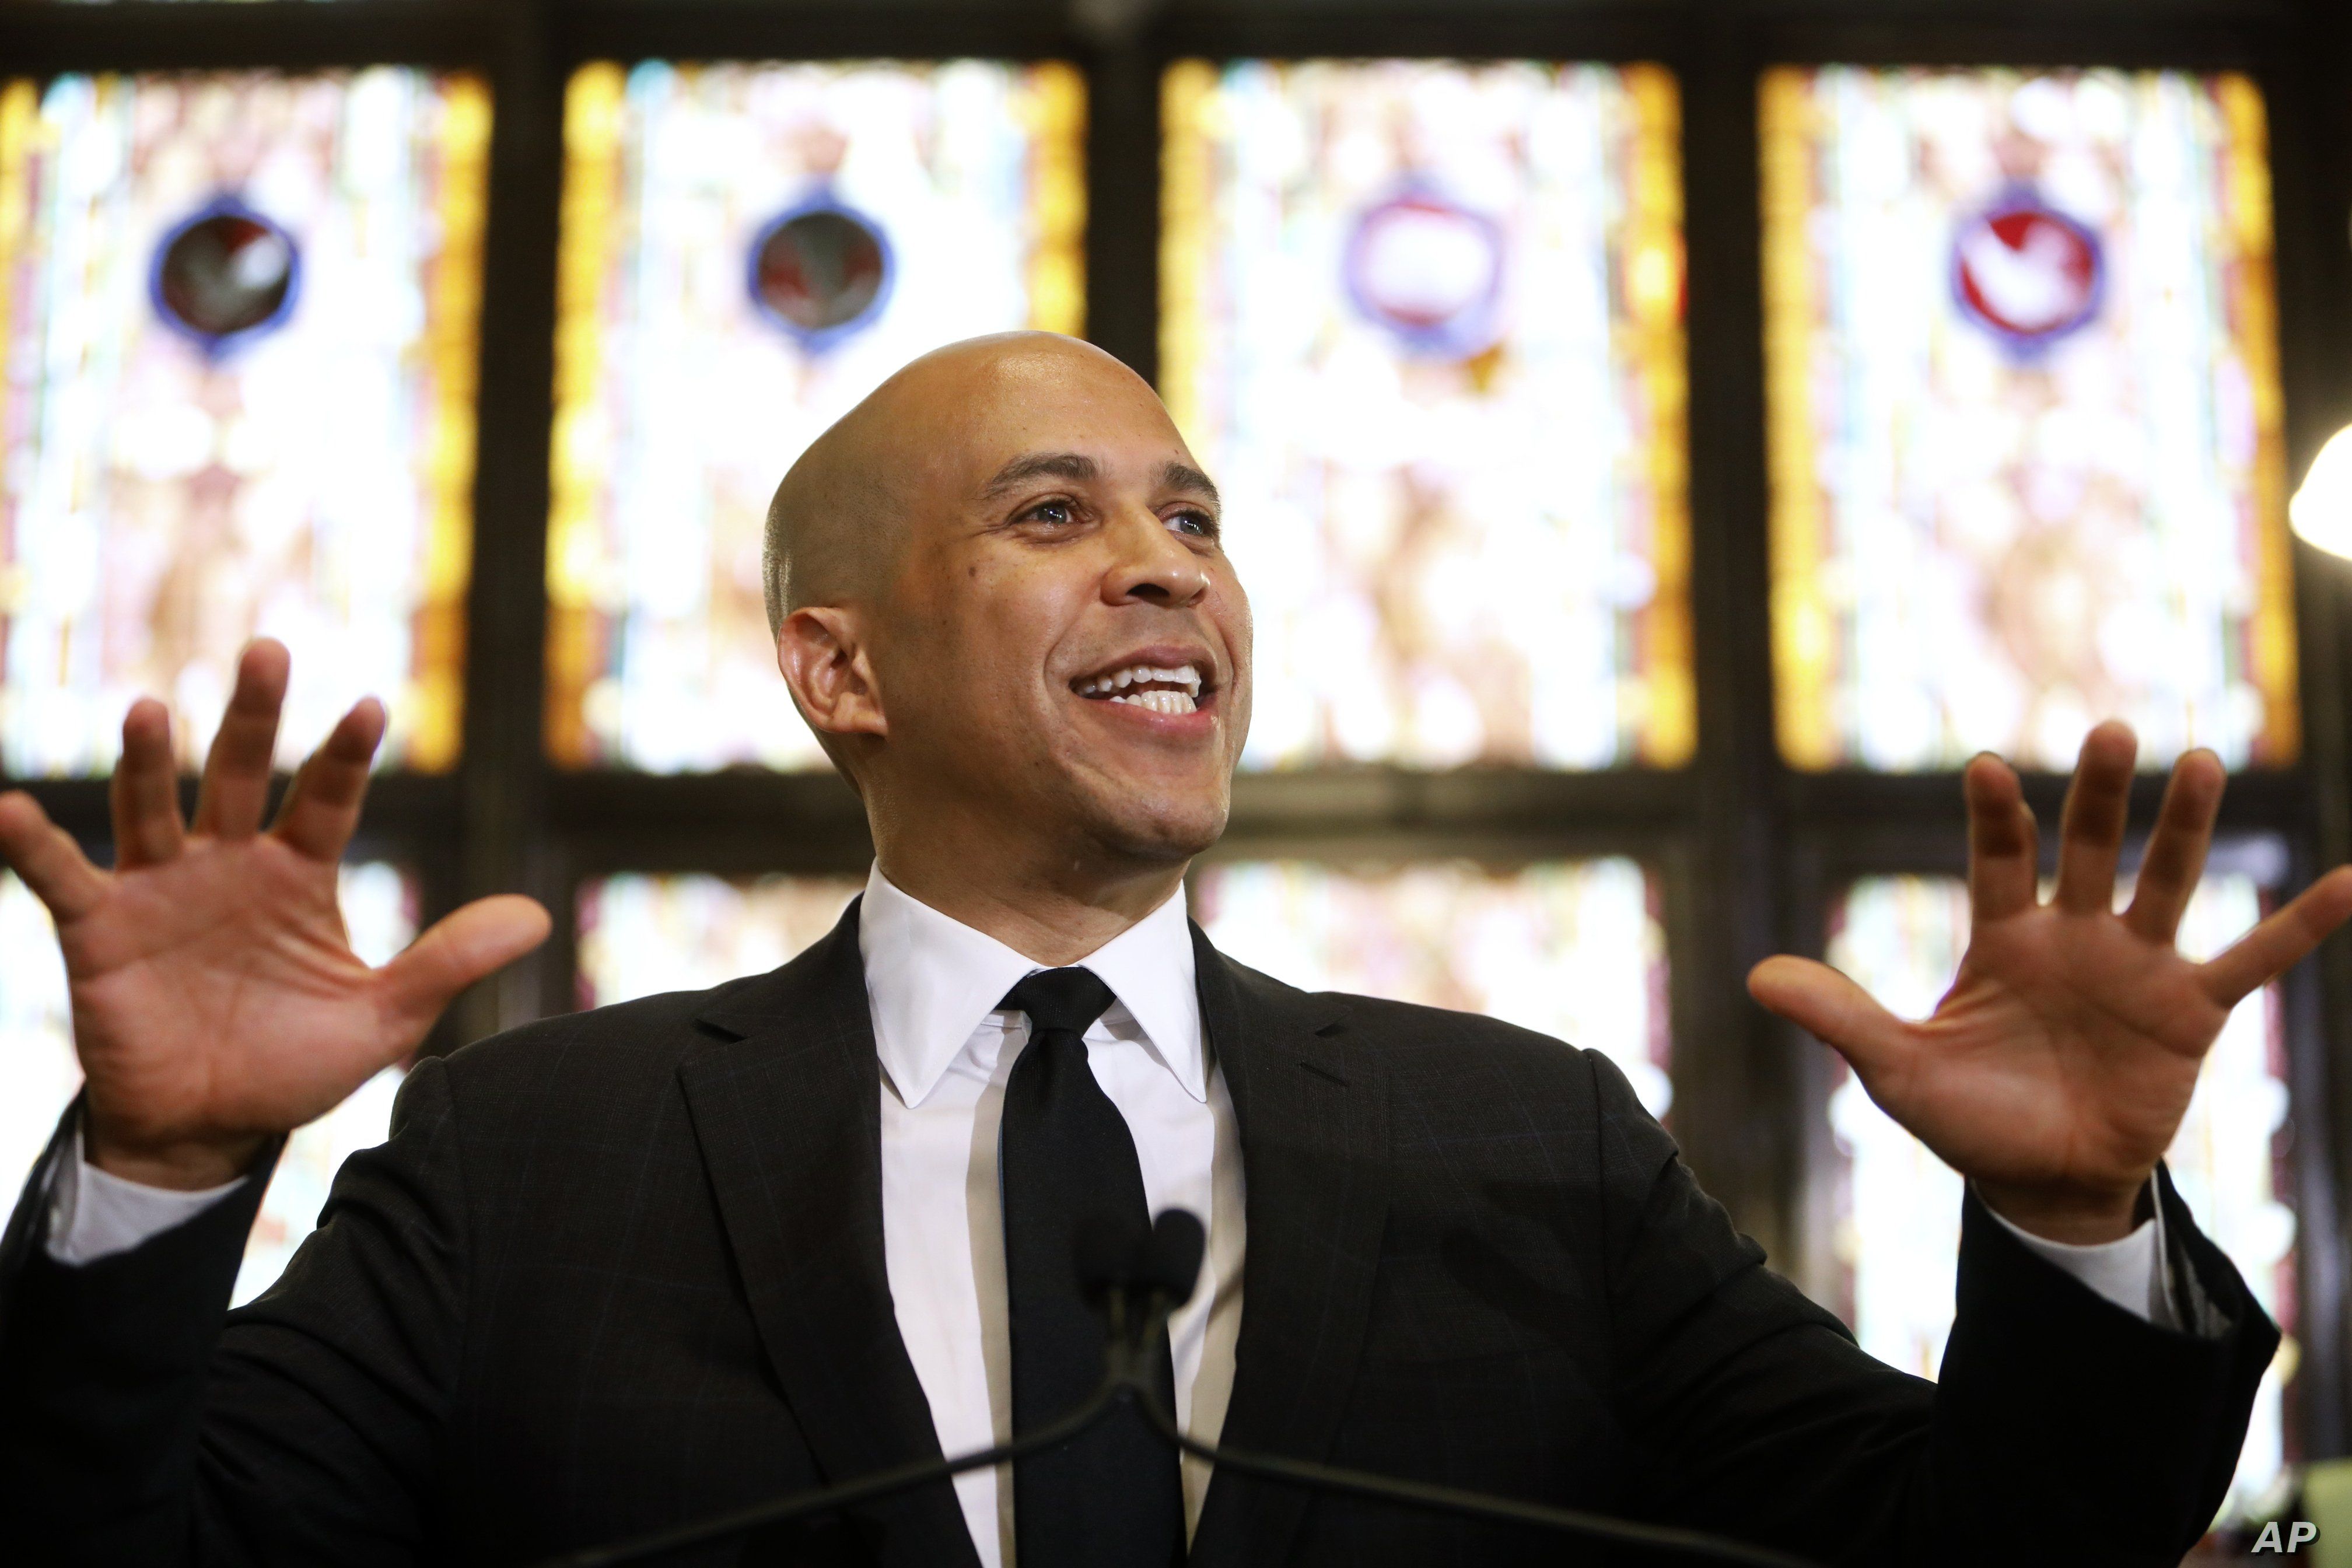 Democratic presidential candidate, Sen. Cory Booker, D-N.J., speaks about gun control at Mother Emanuel AME Church, Aug. 7, 2019, in Charleston, S.C. Nine black Bible study participants were killed at the church in a 2015 racist attack. 